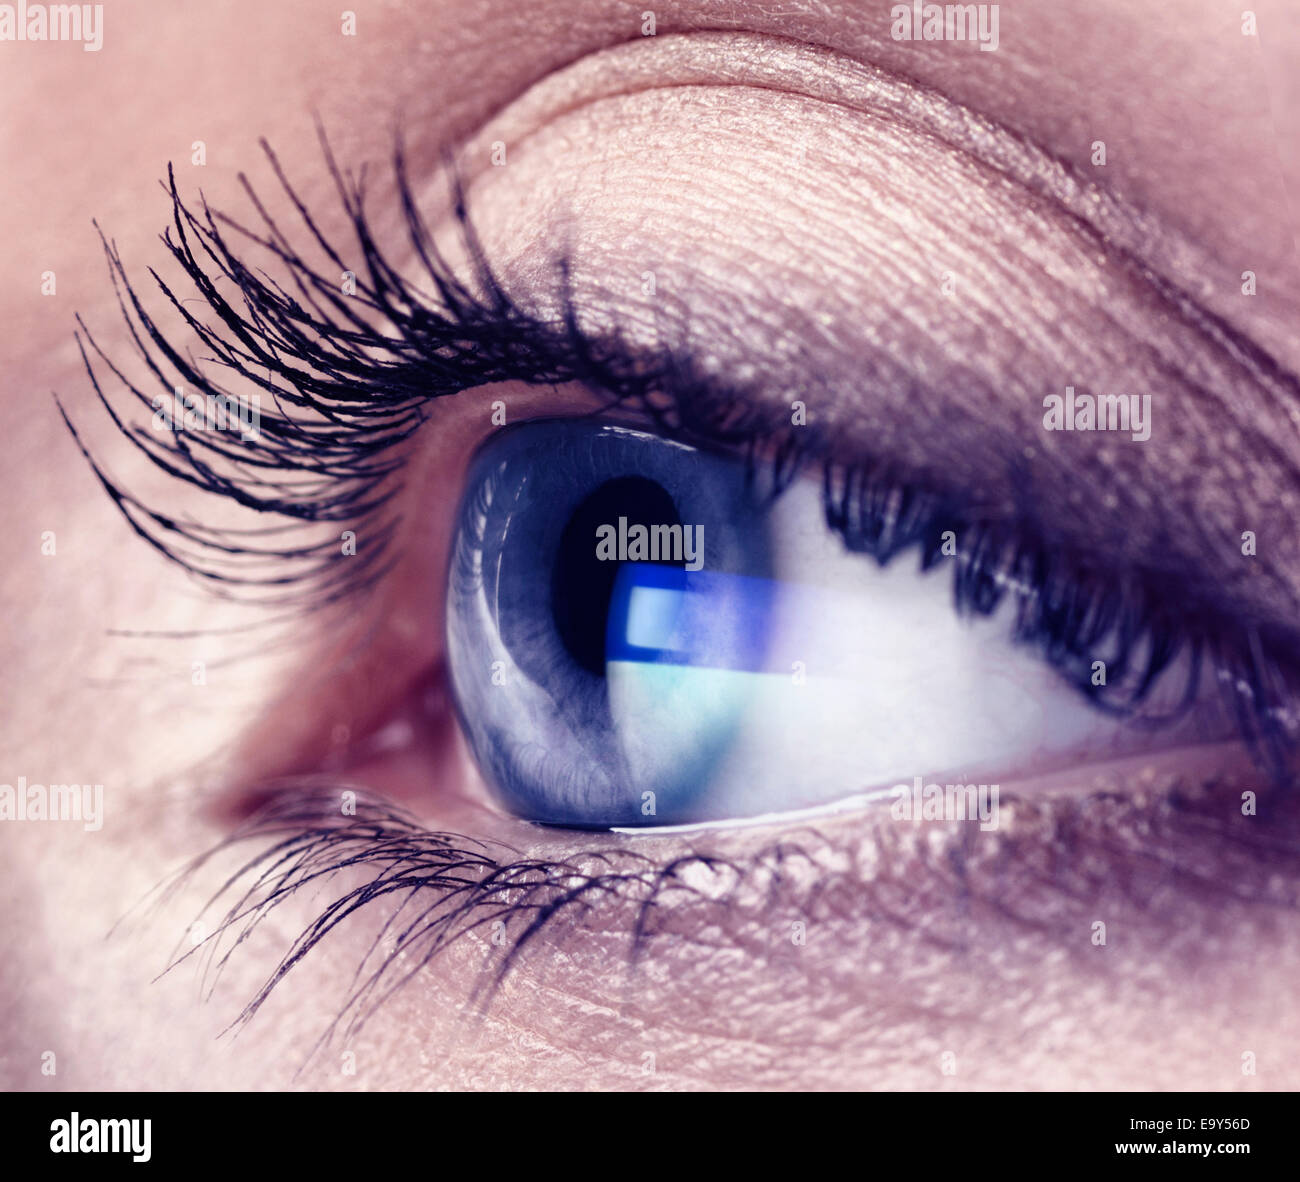 Human eye showing close-up of blue iris and pupil - Stock Image - F024/0271  - Science Photo Library